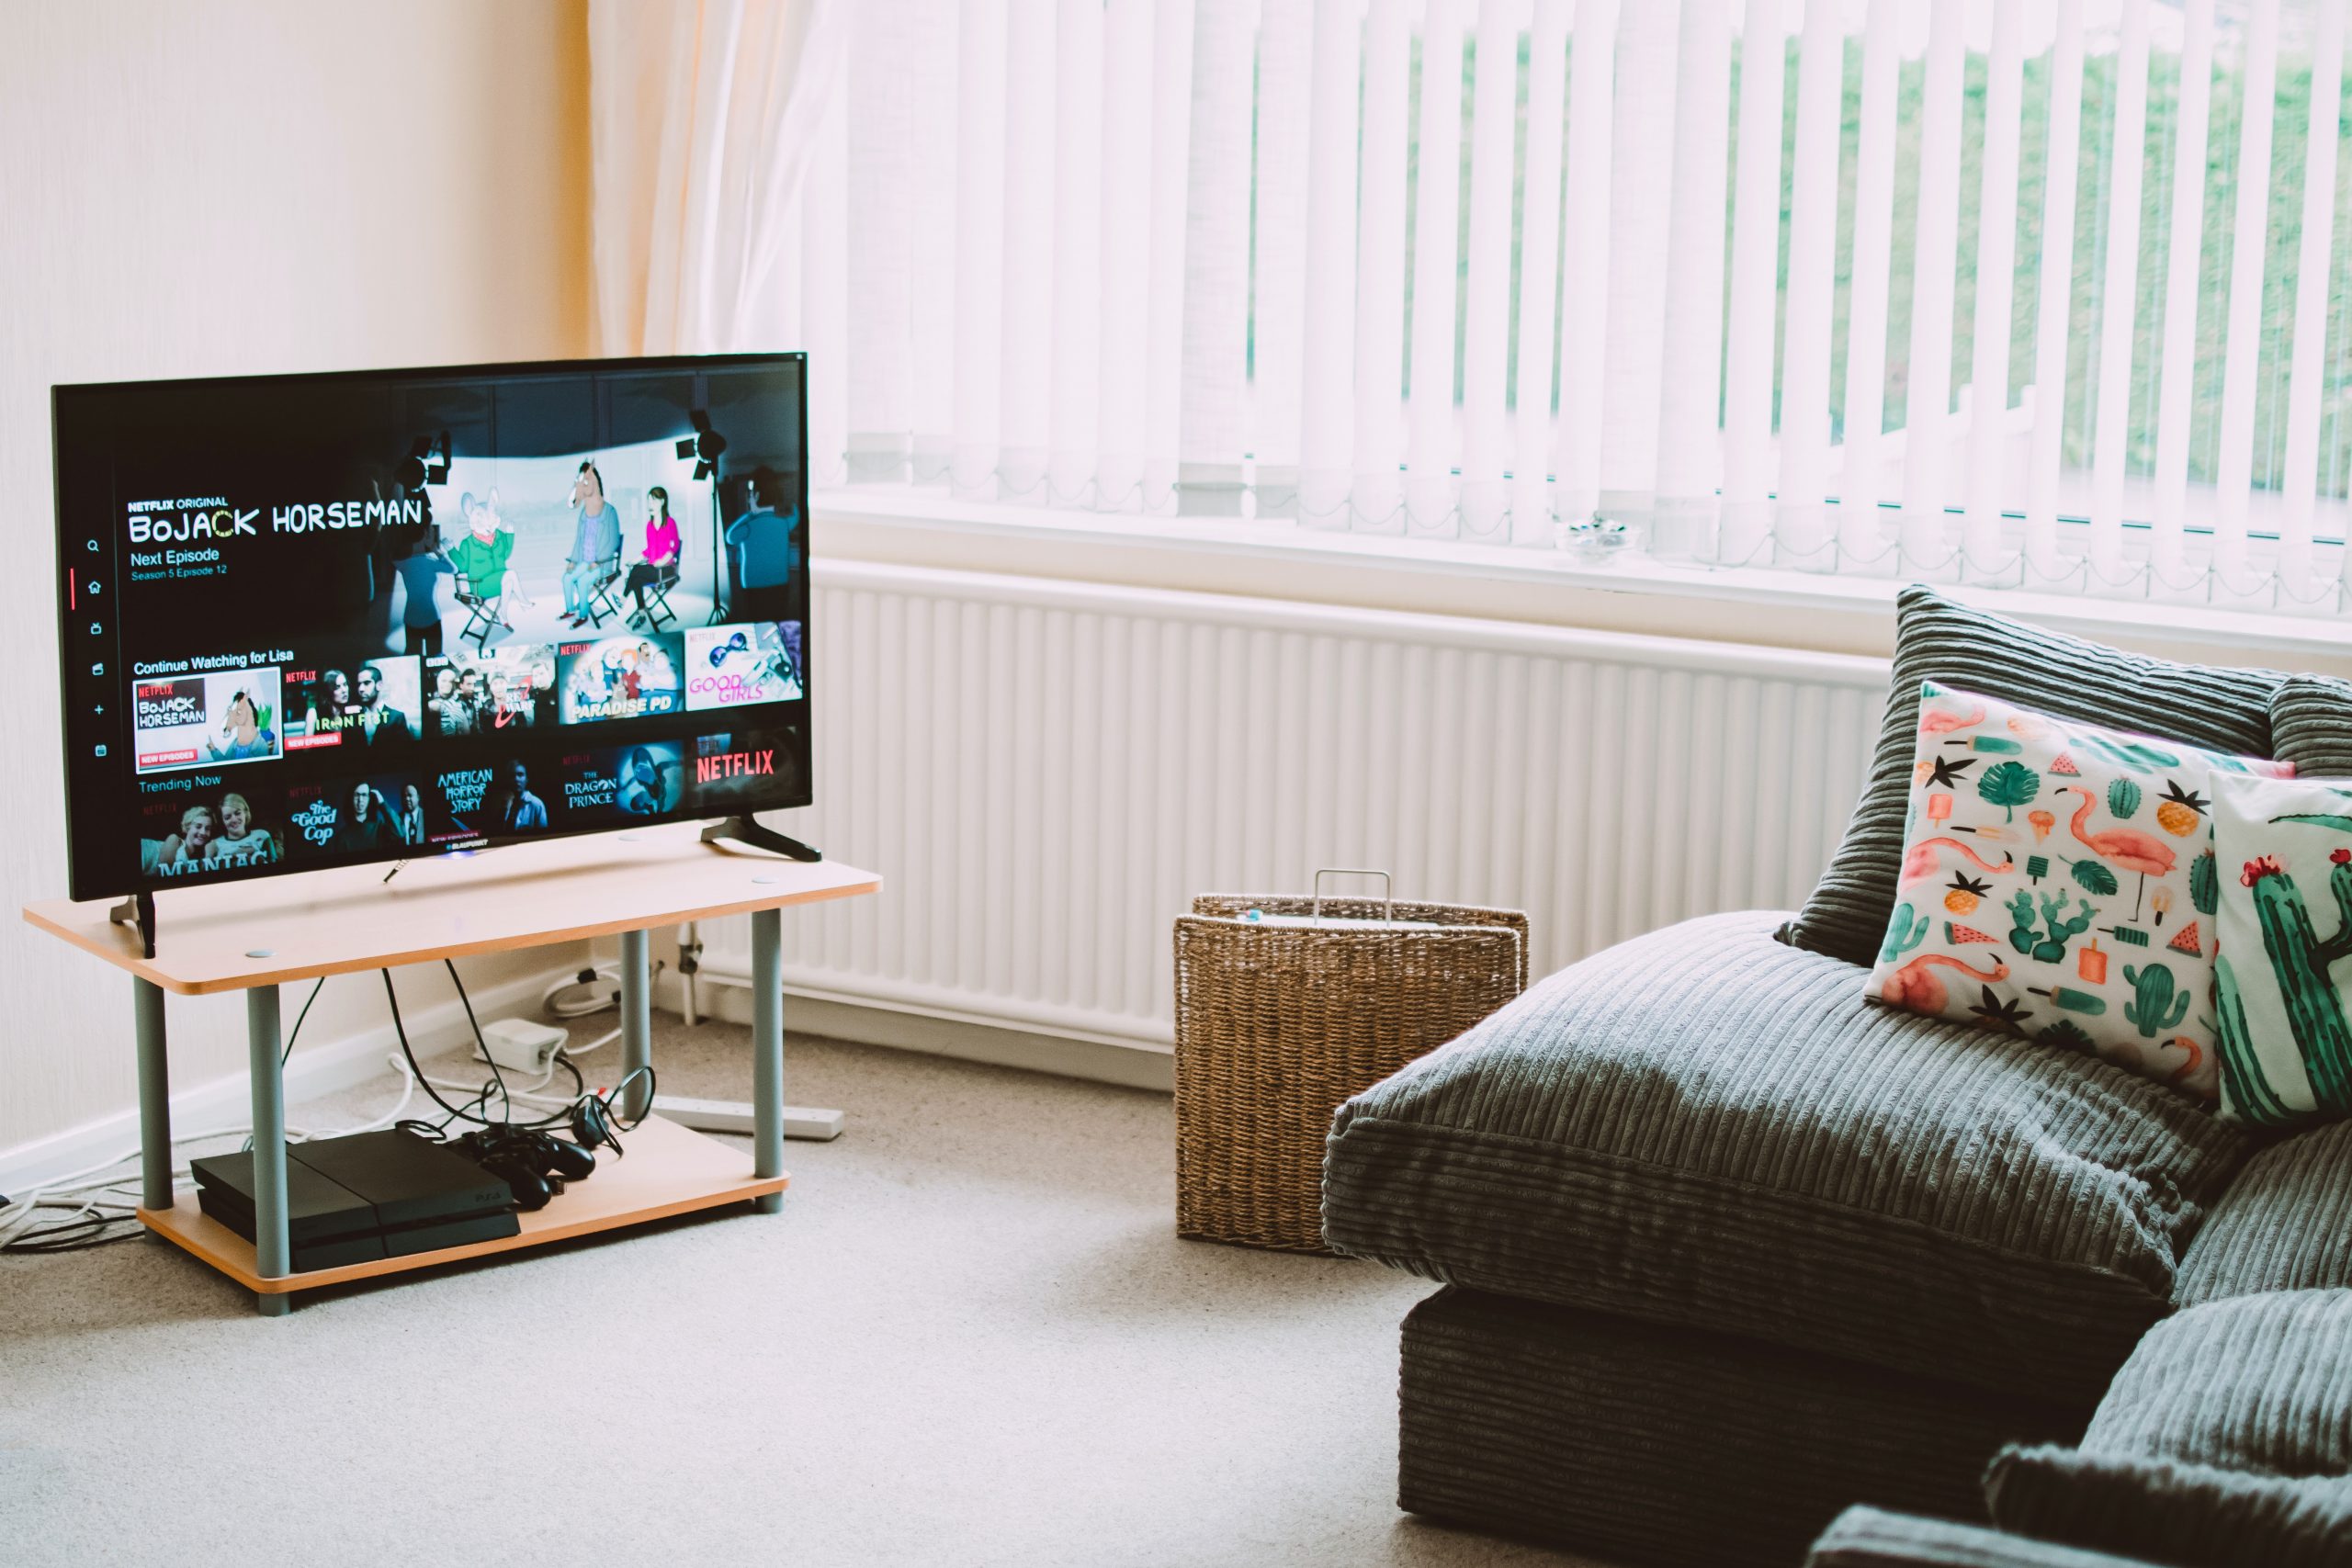 7 Things to Keep in Mind Before Finalizing a Smart TV